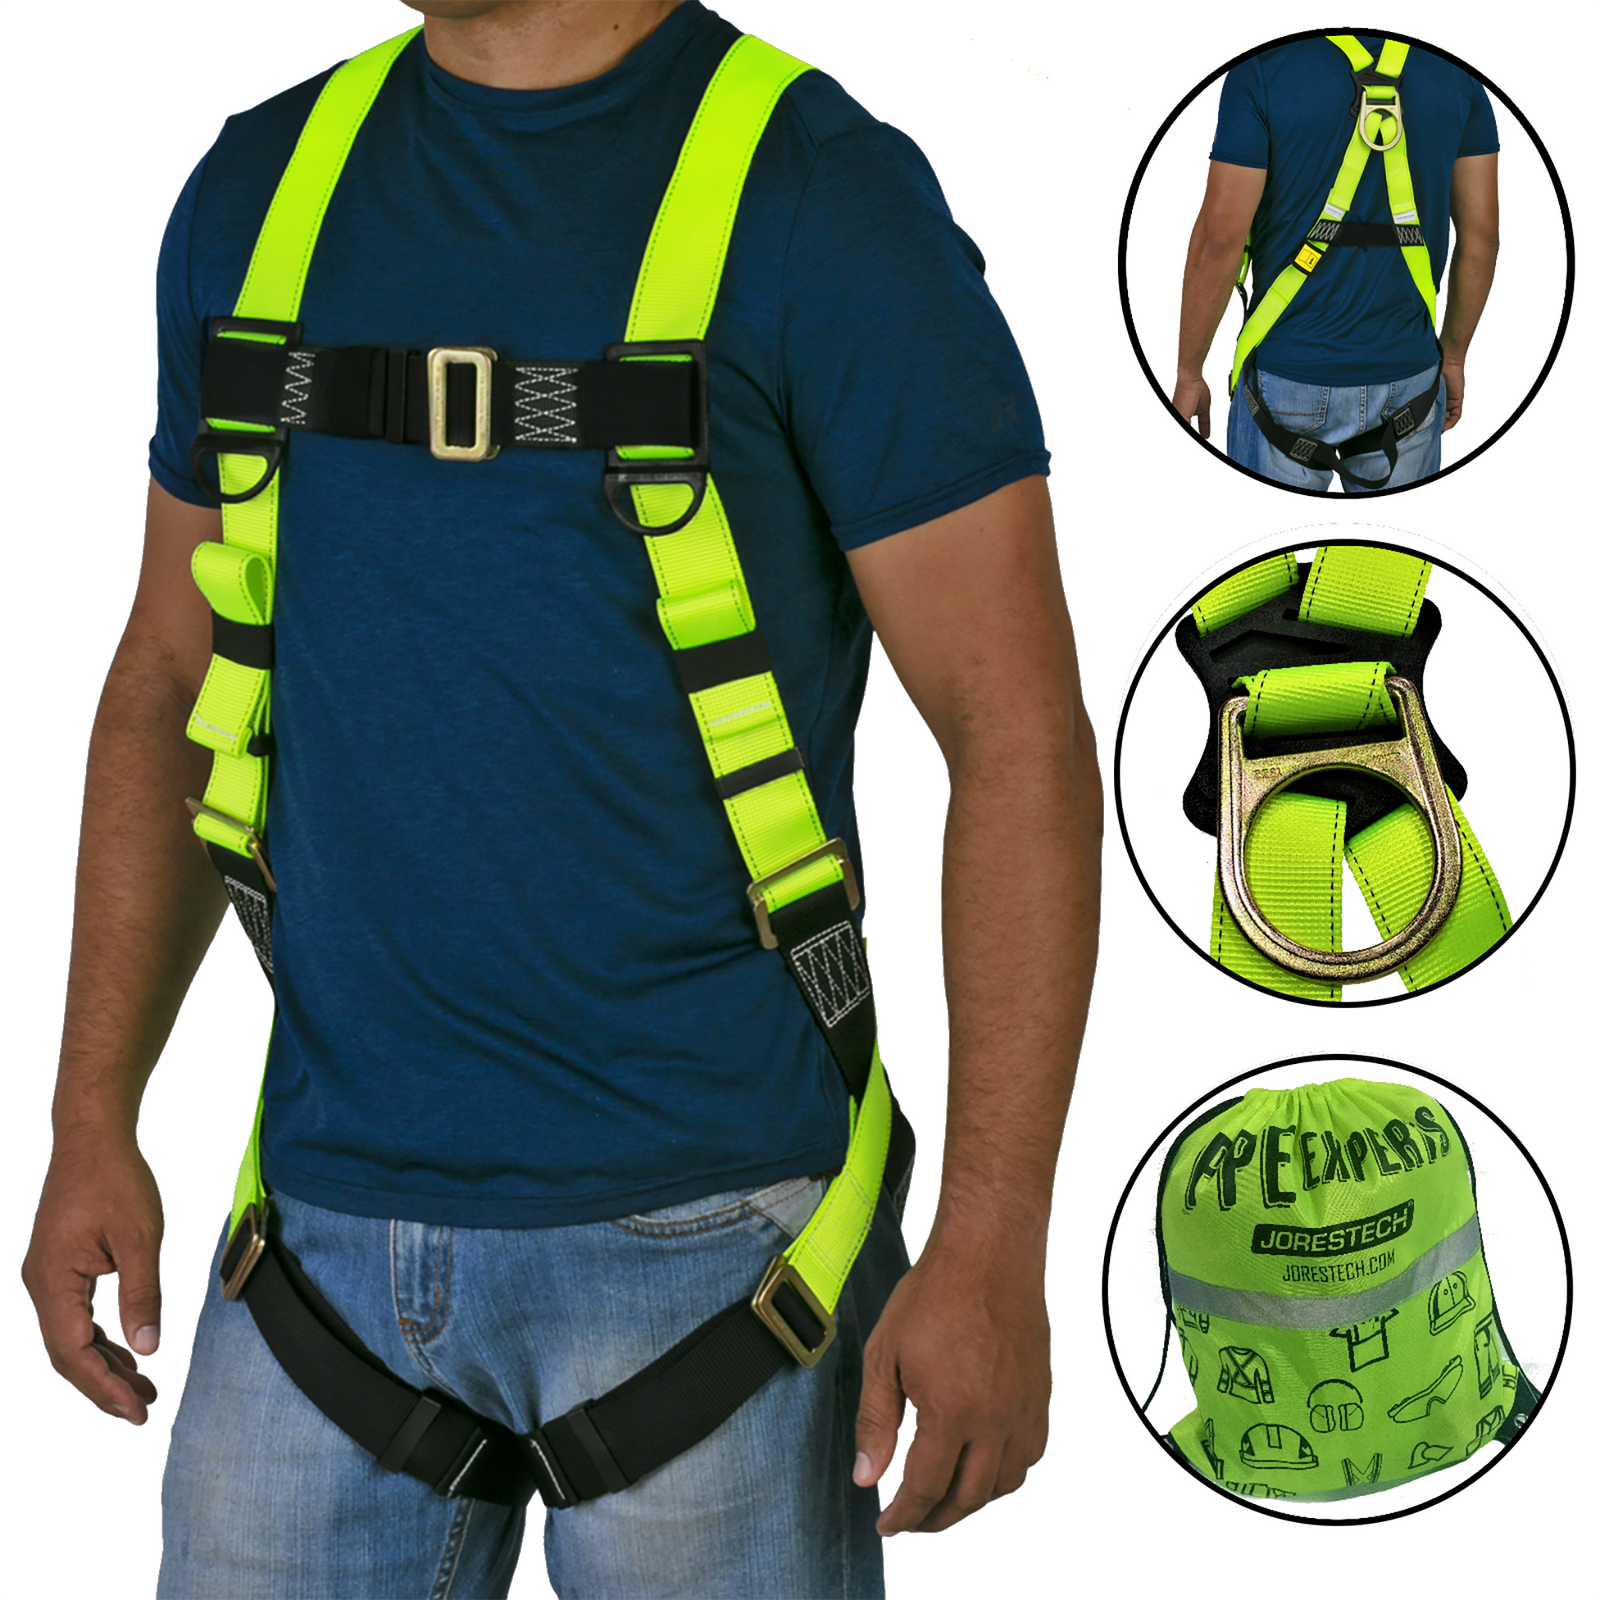 The torso of a person wearing the hi-vis yellow and black 1D fall protection safety body JORESTECH harness. Close-ups show the back view of the same person wearing the harness,  the back ring and a the hi-vis lime carry bag that is included with the harness